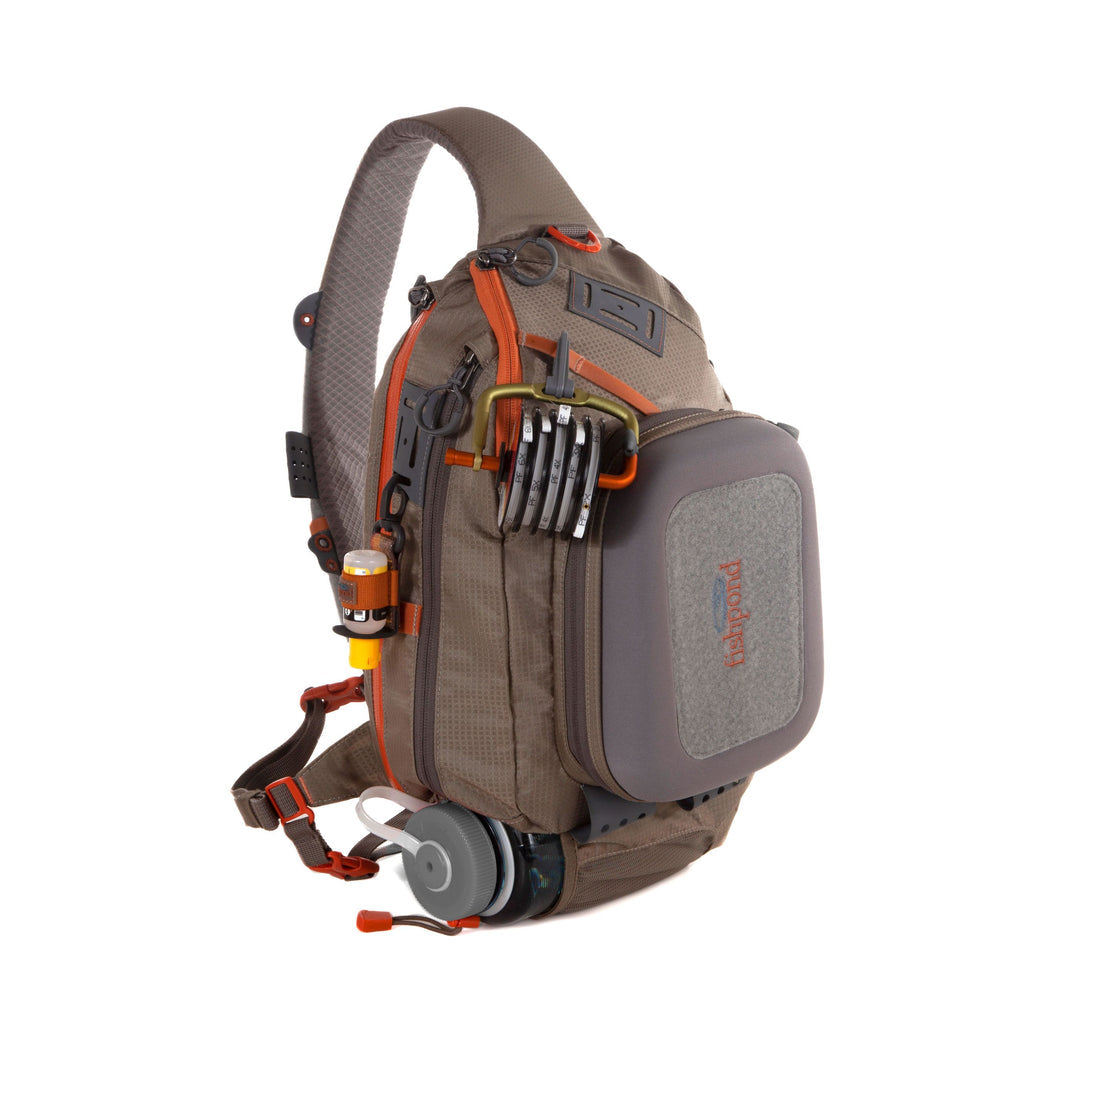 Fishpond Tenderfoot Youth Vest – Out Fly Fishing